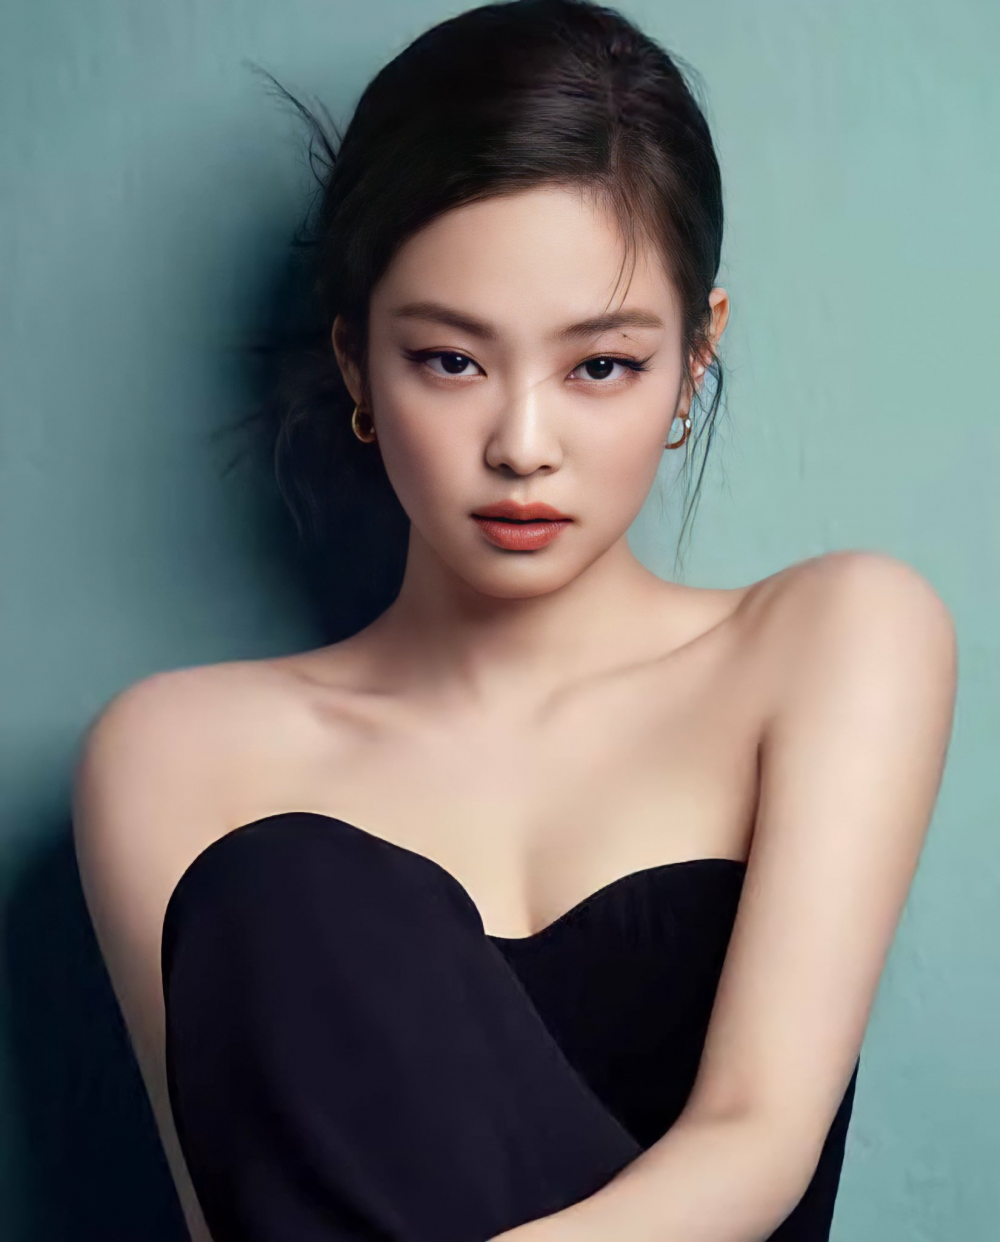 BLACKPINK's Jennie boasts of her captivating beauty in a new